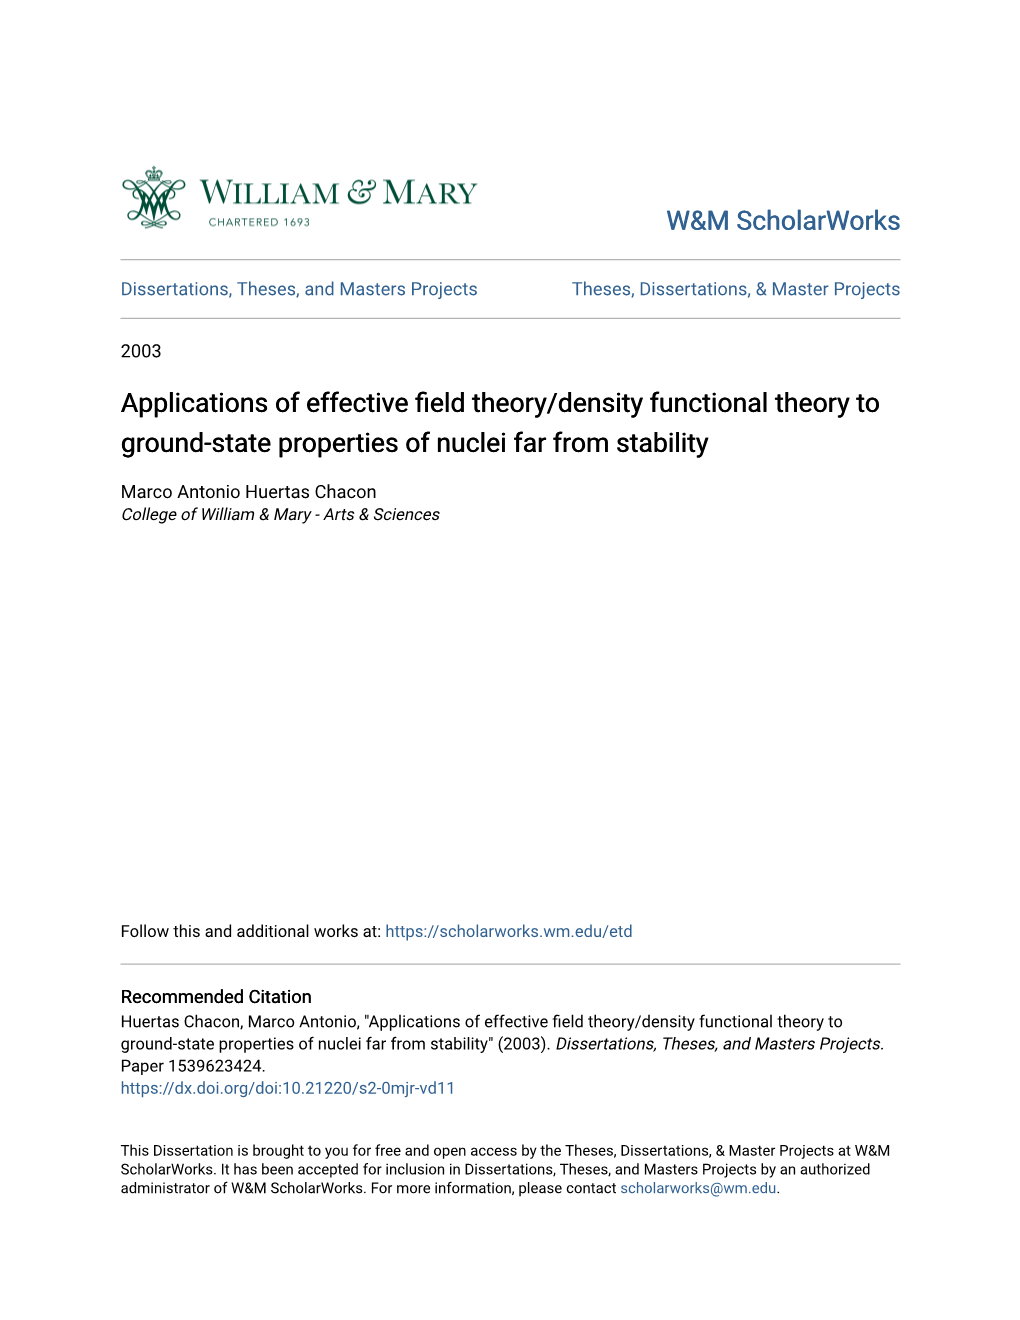 Applications of Effective Field Theory/Density Functional Theory to Ground-State Properties of Nuclei Far from Stability